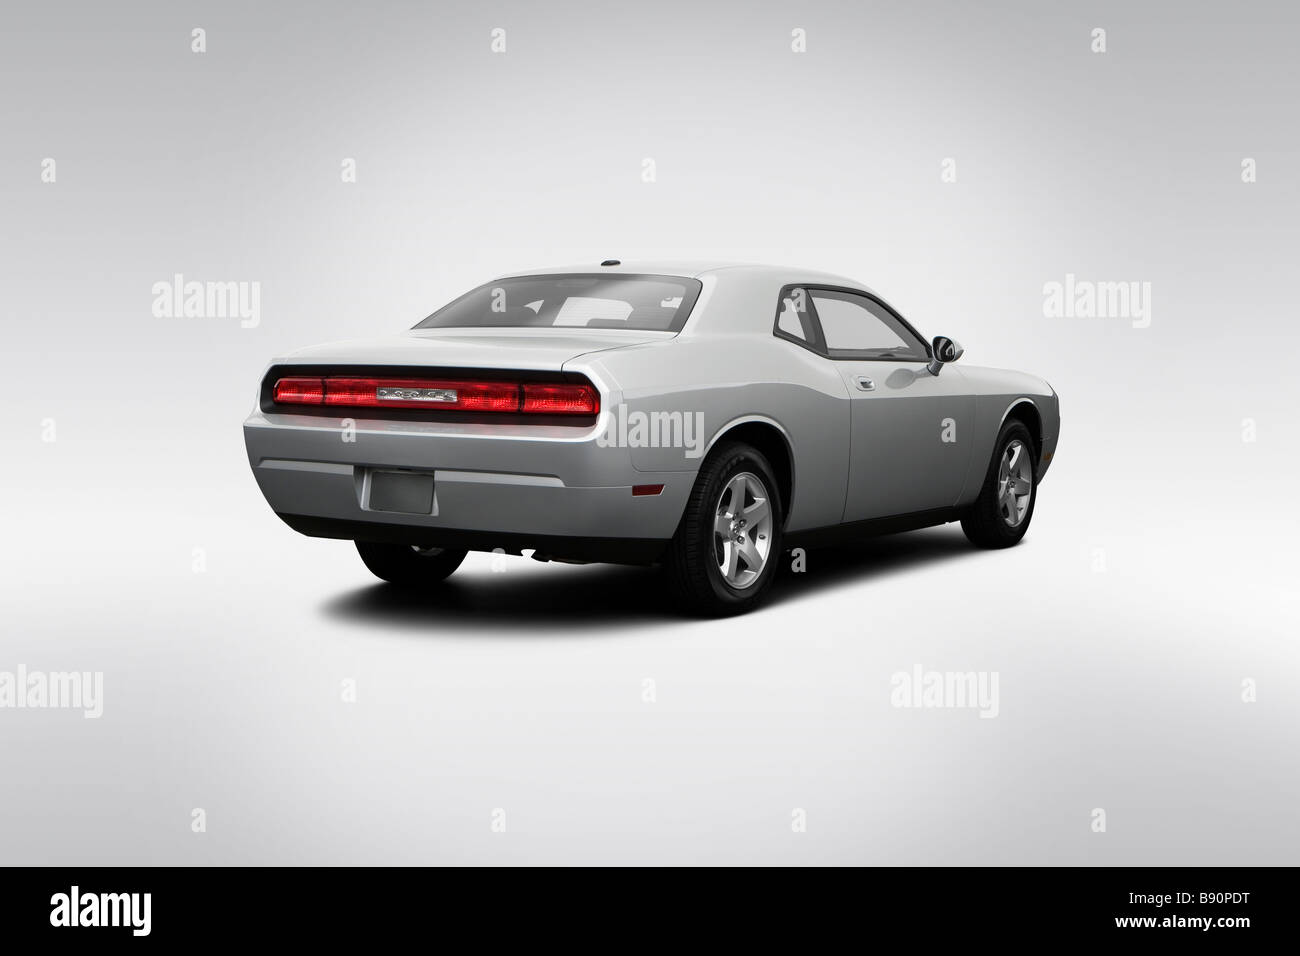 2009 Dodge Challenger SE in Silver - Rear angle view Stock Photo